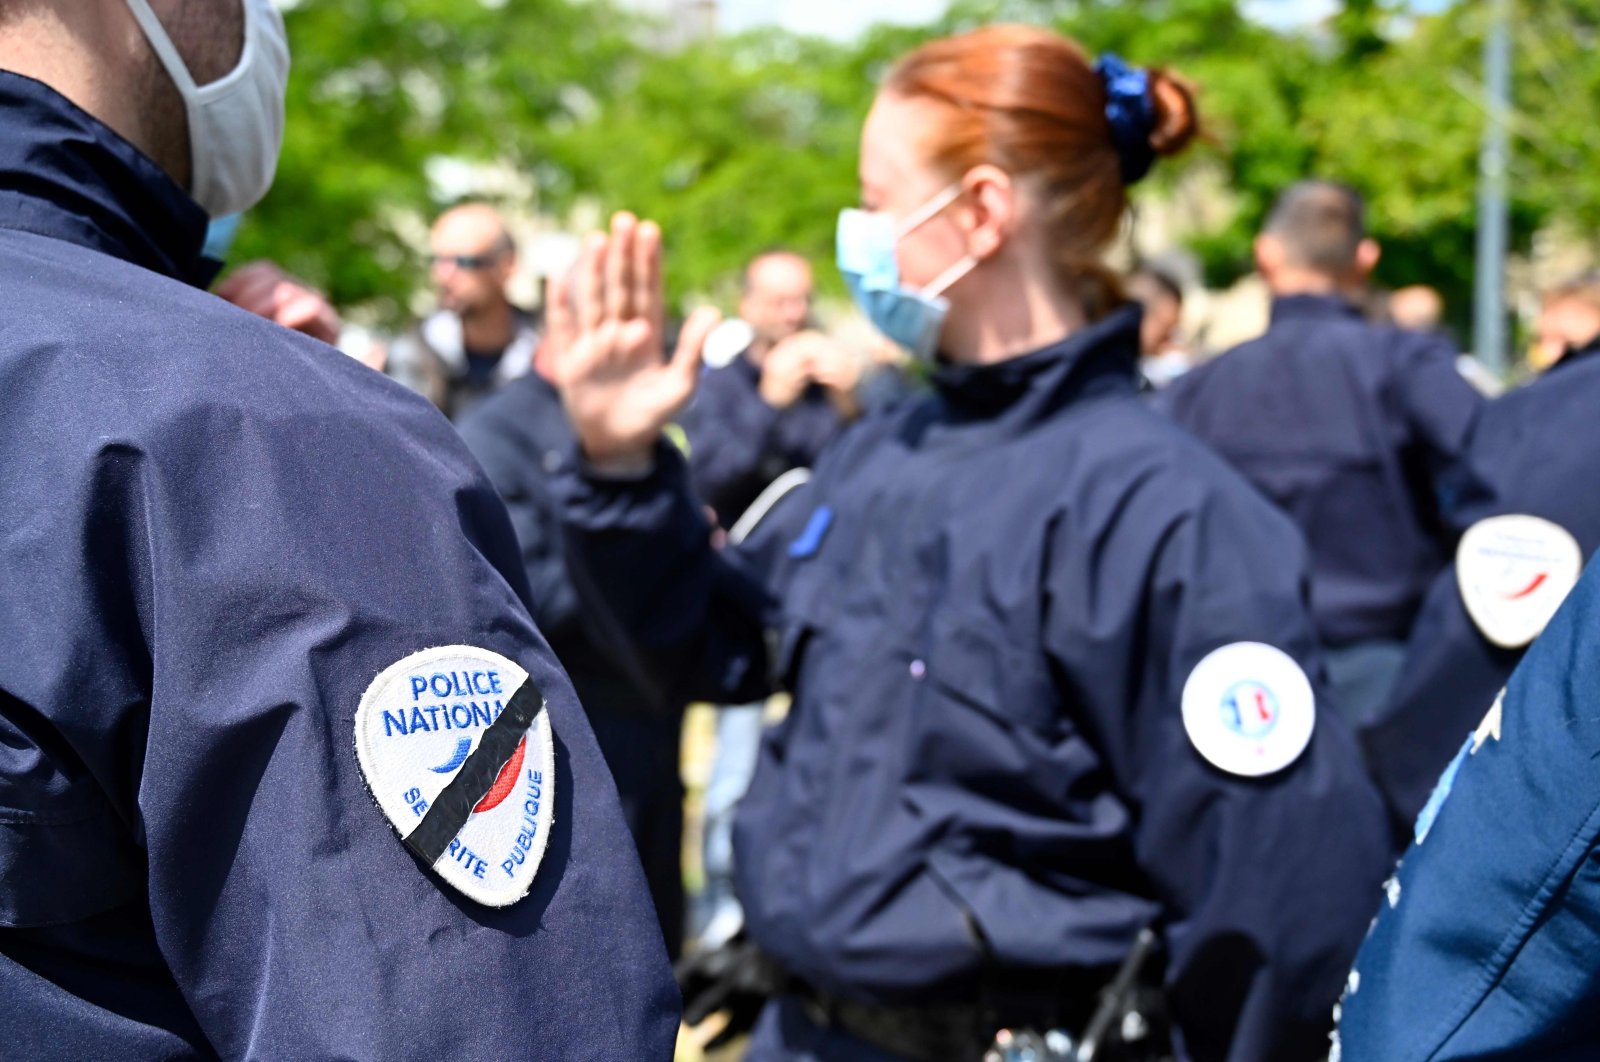 Police officers gather next to the Rennes' prefecture during a protest called by several unions against French Interior Minister's announcements following demonstrations against police brutality and racism in France, June 12, 2020. (AFP Photo)